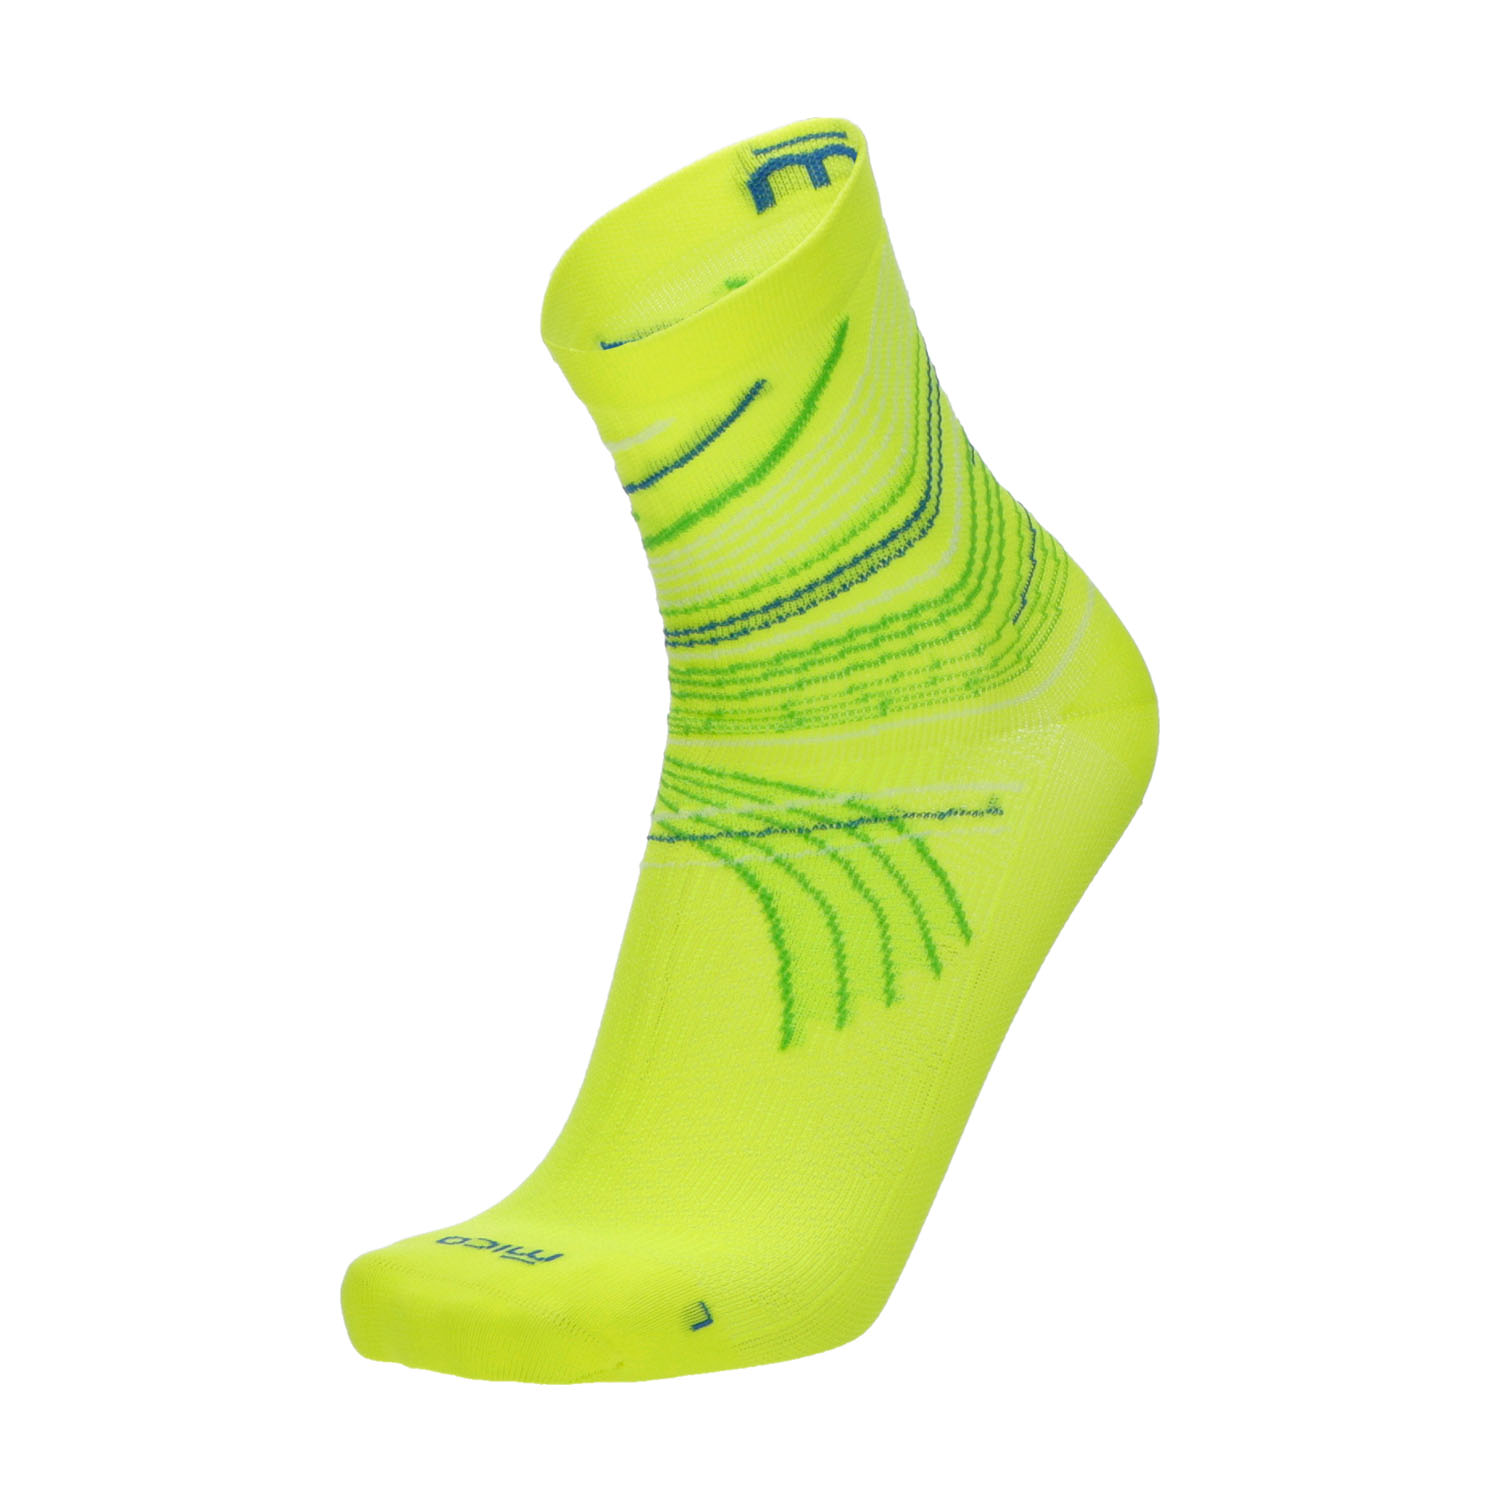 Mico Performance Extra Dry Light Weight Calcetines - Giallo Fluo